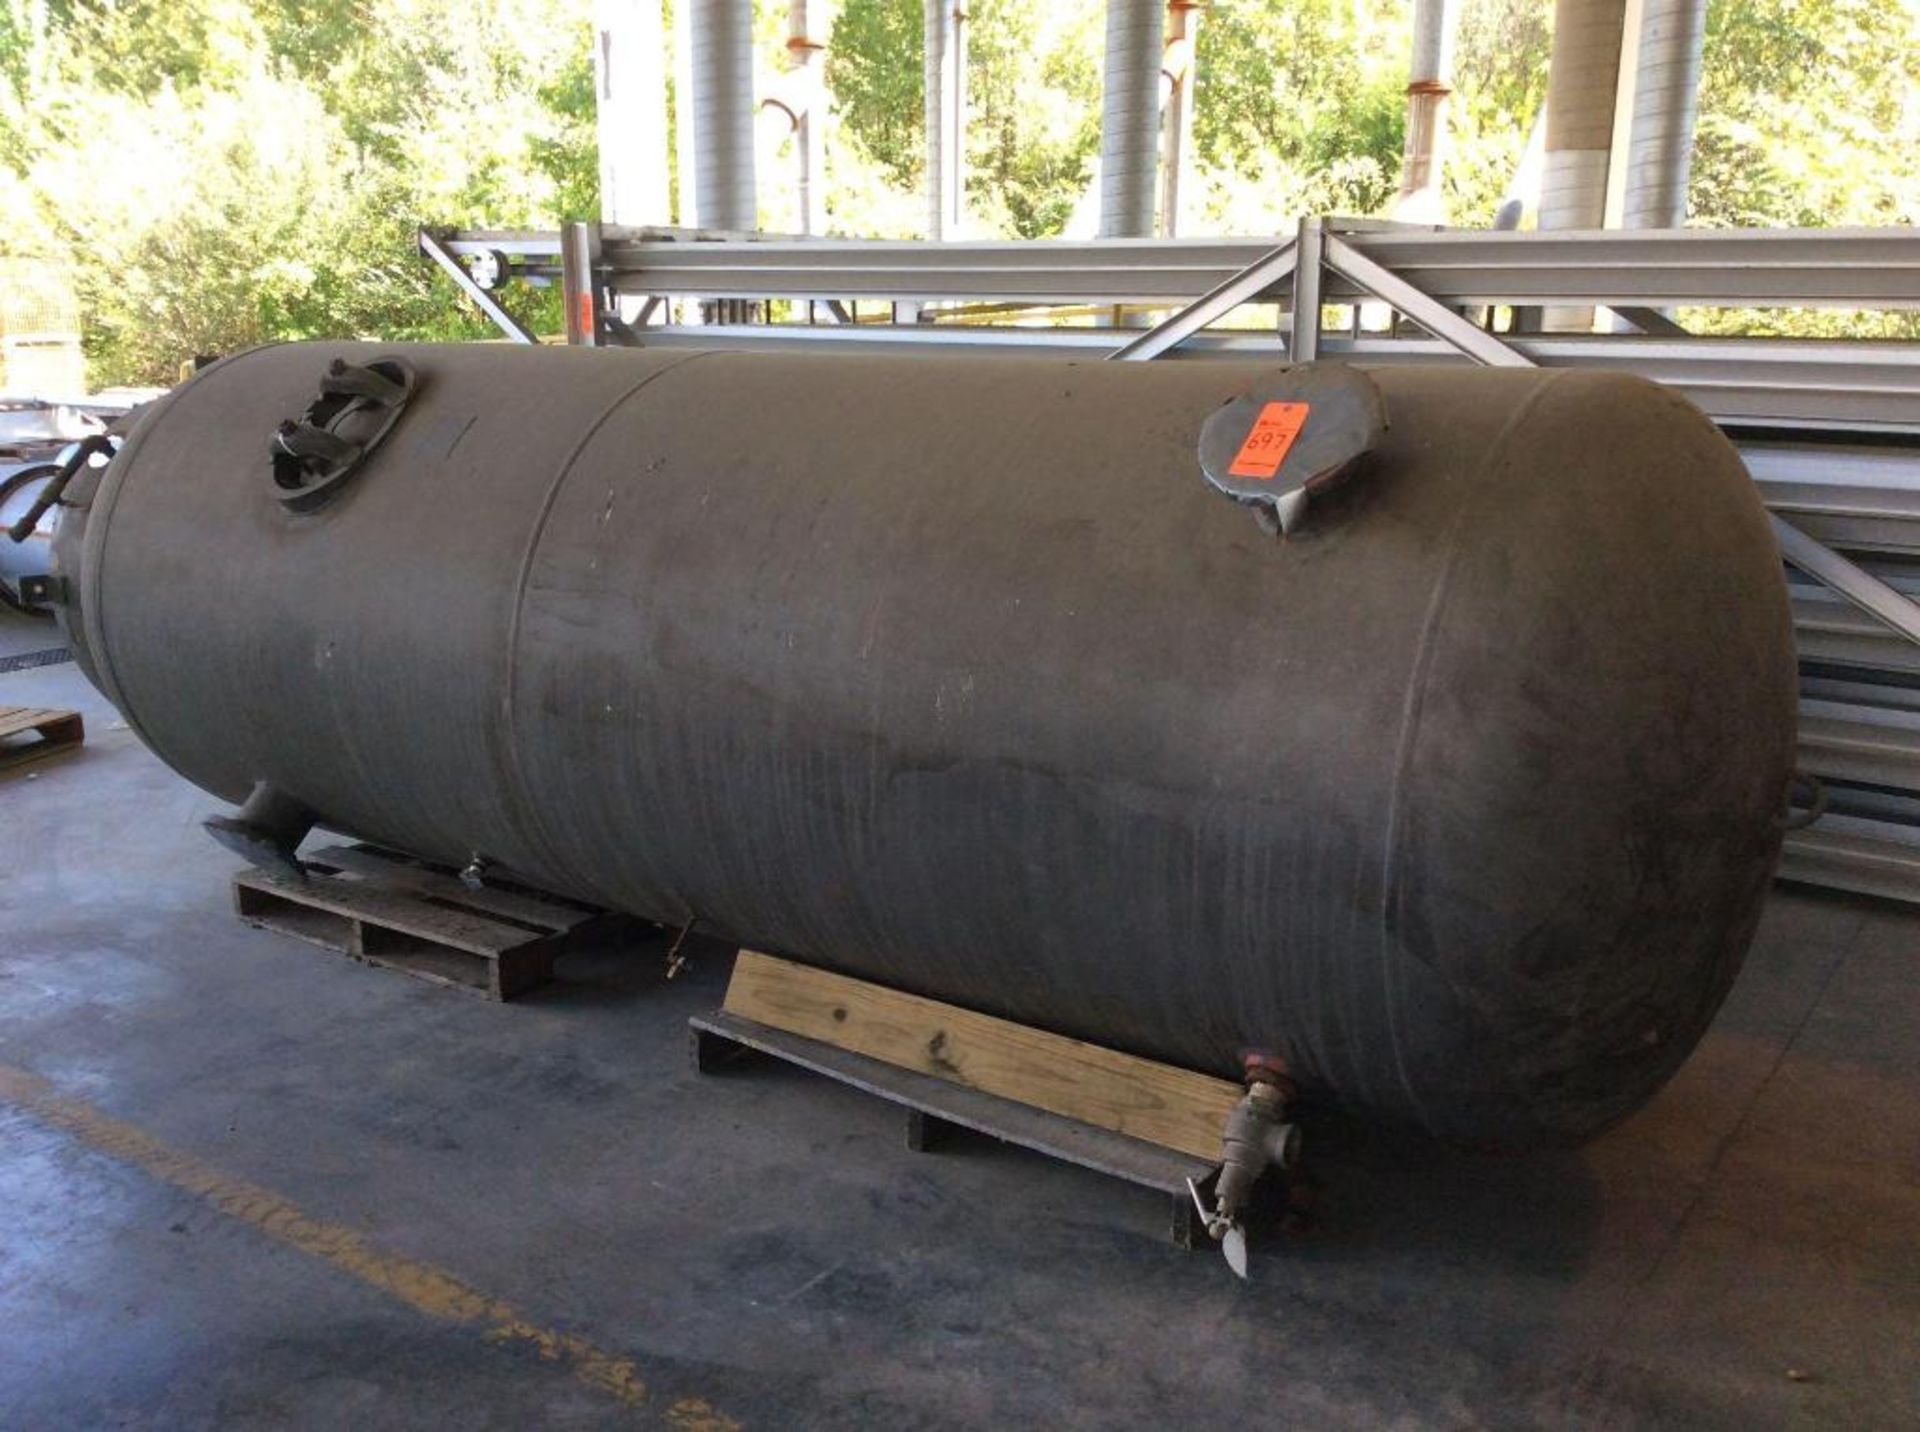 Approx 14' high vertical storage tank, 1550 gross gal capacity, mawp 150 psig @ 400, built in 2005